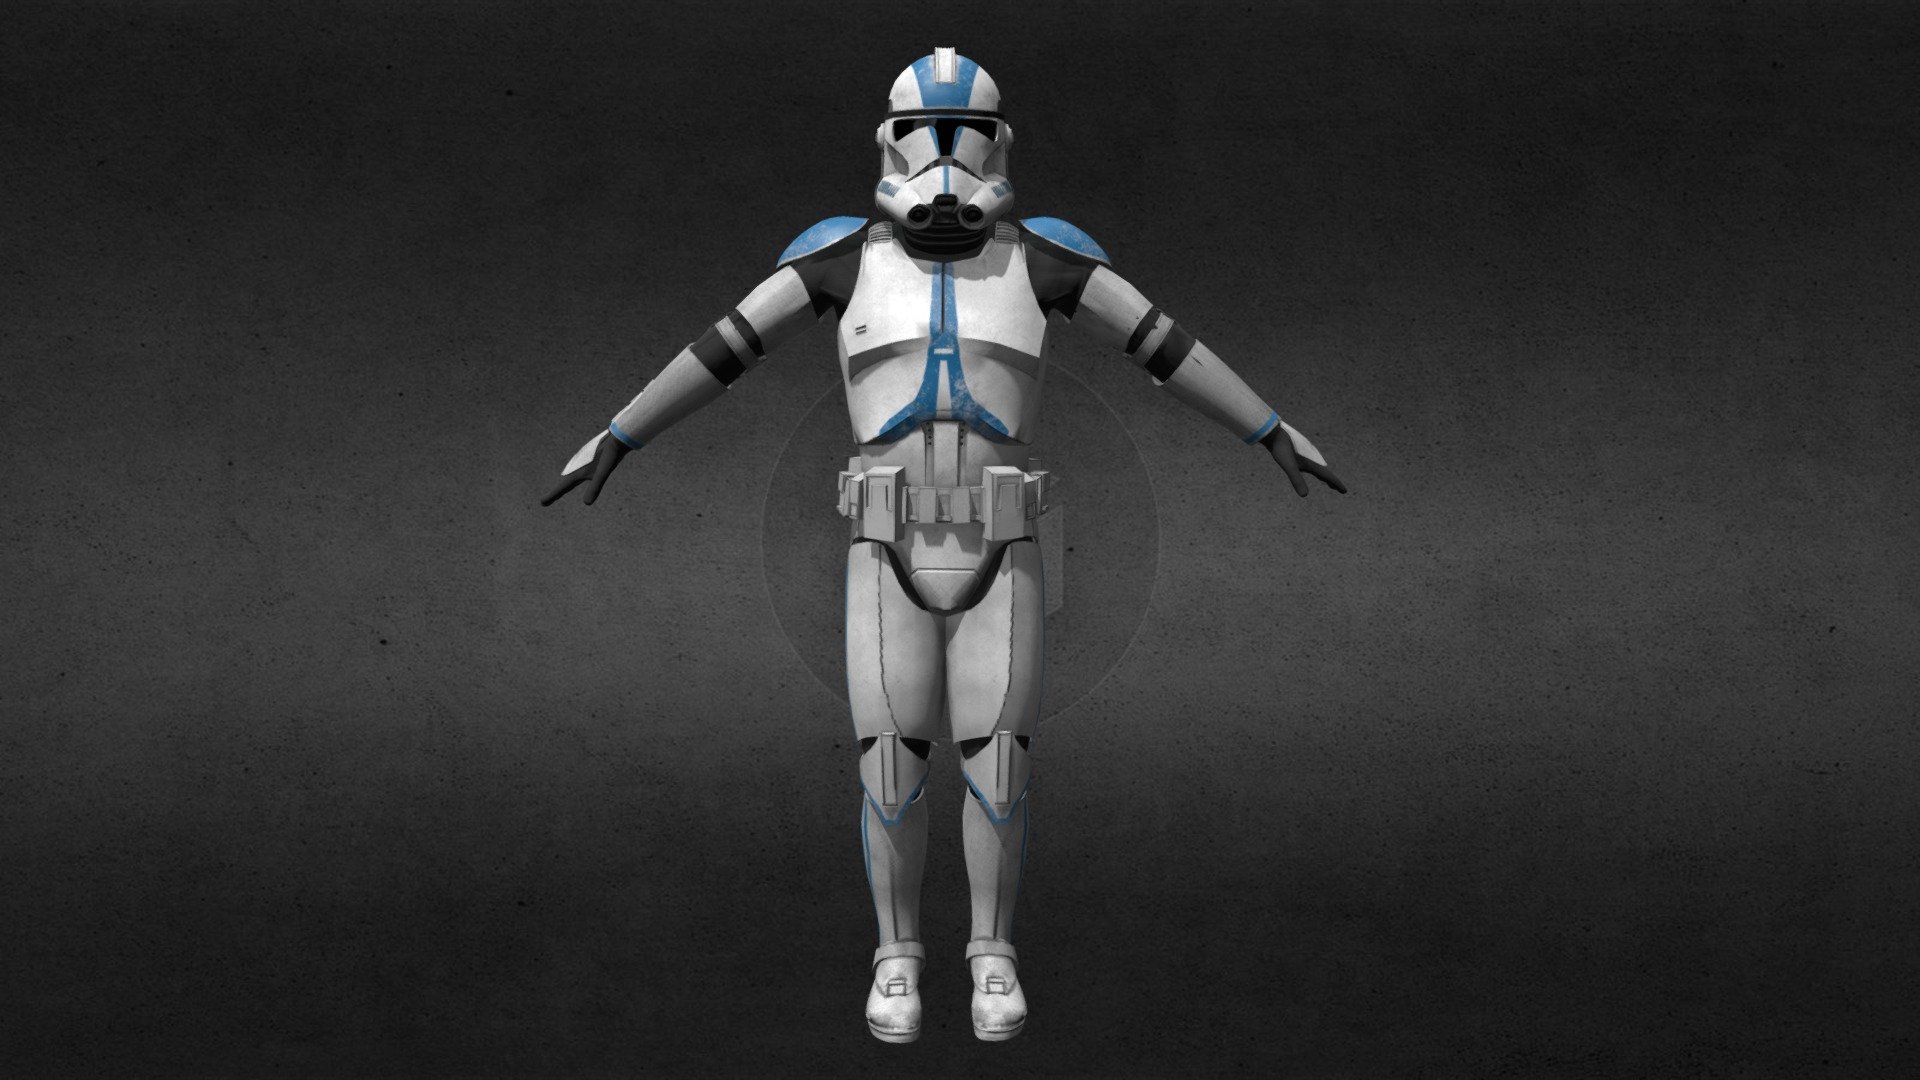 This is the same model as my Updated P2 Clone, but with a 501st skin.

Join the Discord! https://discord.gg/J6Y2SqW - Clone Trooper Phase2 (501st) - Download Free 3D model by Marr Velz (@marr_velz) 3d model